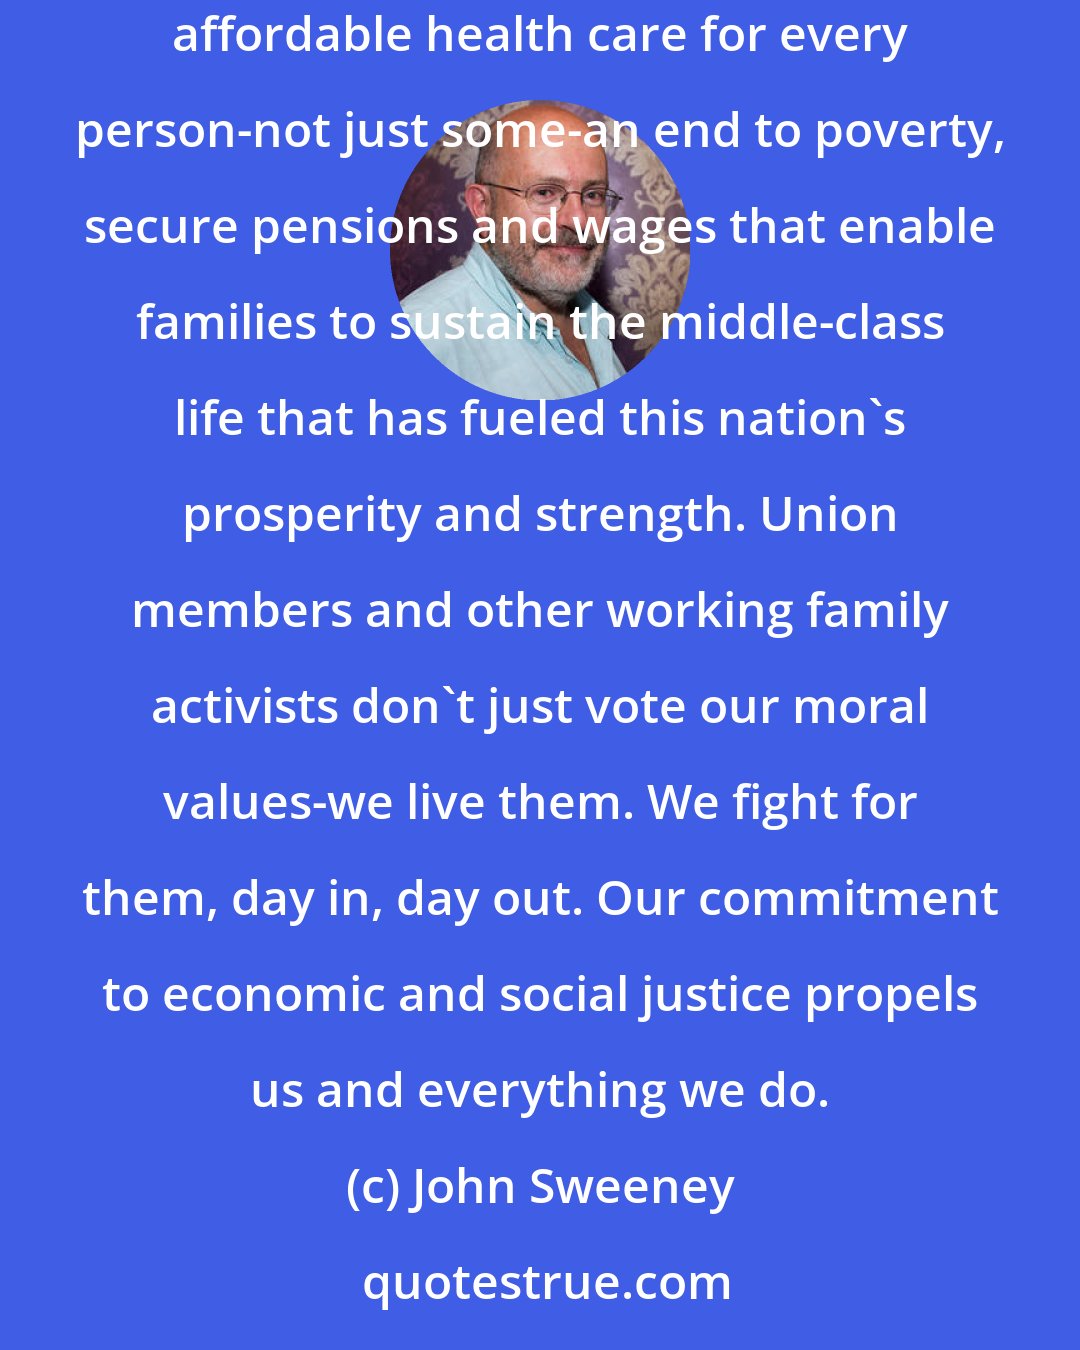 John Sweeney: As it has over the decades, the union movement stands for the fundamental moral values that make America strong: quality education for our children, affordable health care for every person-not just some-an end to poverty, secure pensions and wages that enable families to sustain the middle-class life that has fueled this nation's prosperity and strength. Union members and other working family activists don't just vote our moral values-we live them. We fight for them, day in, day out. Our commitment to economic and social justice propels us and everything we do.